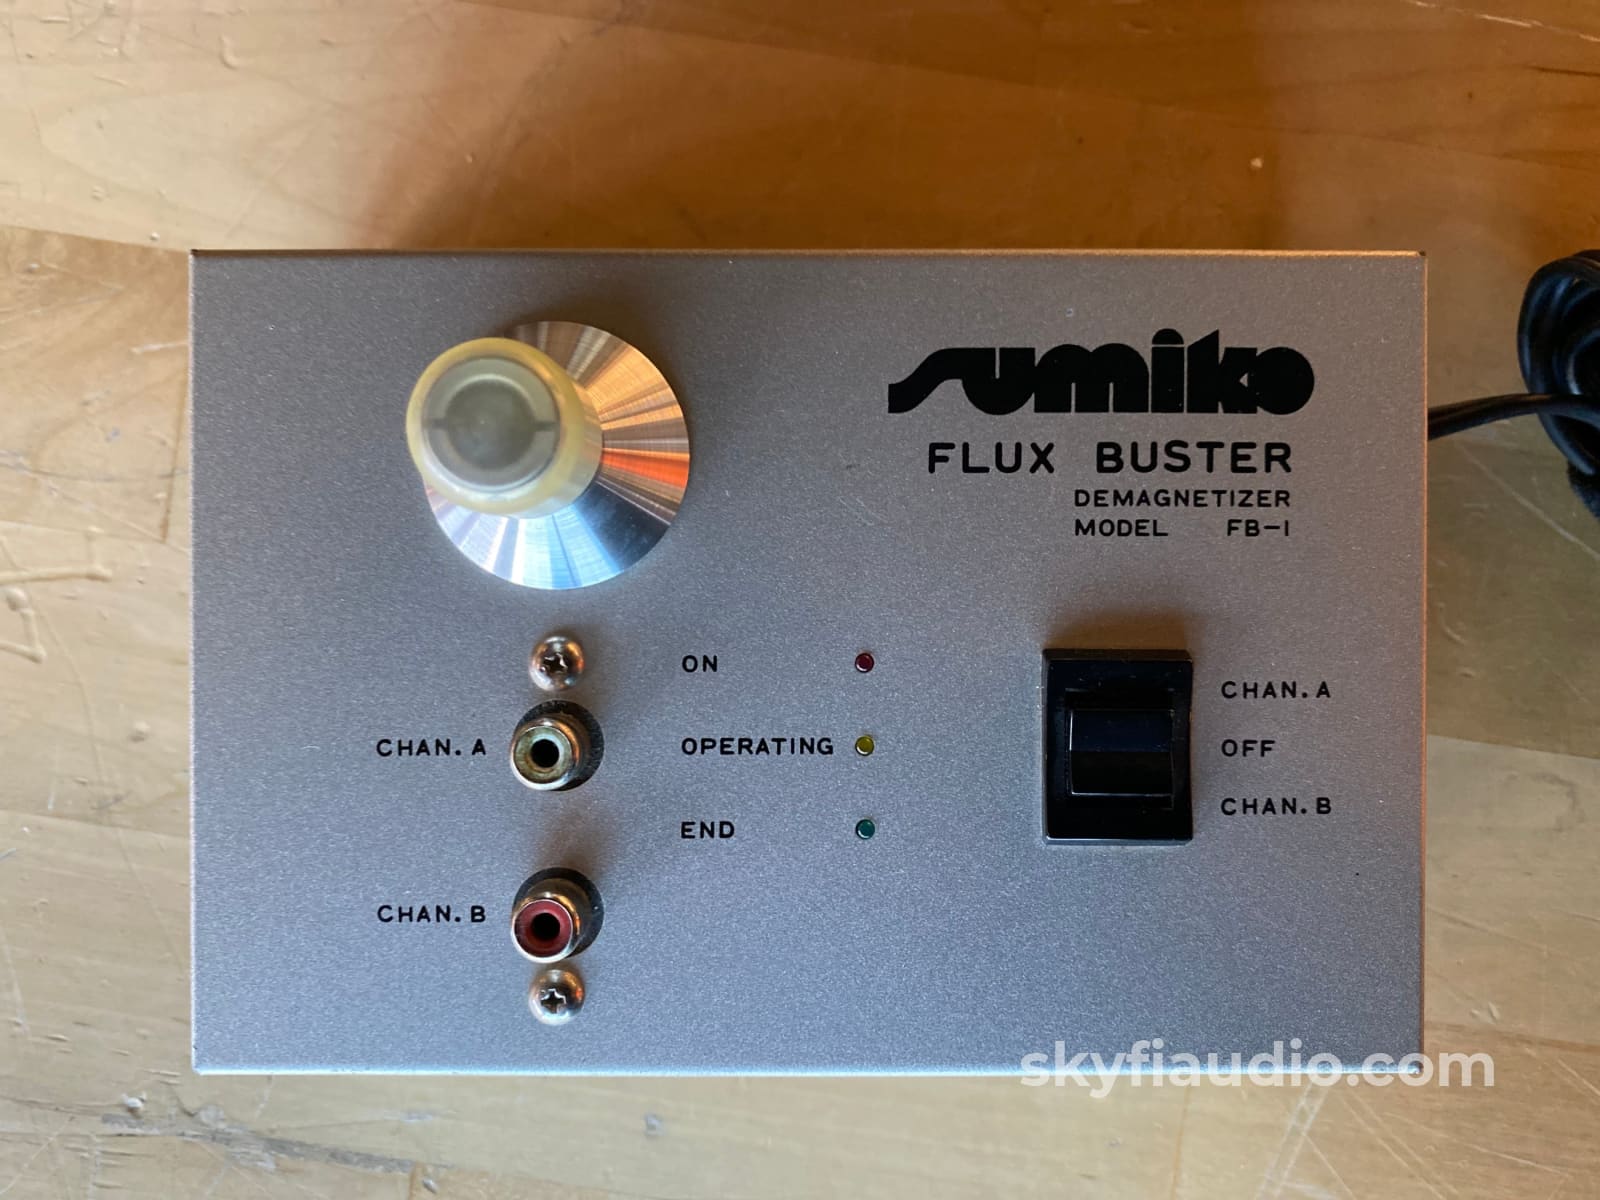 Sumiko Flux Buster Fb-1 Cartridge Demagnetizer - Get The Most From Your Turntable! Accessory